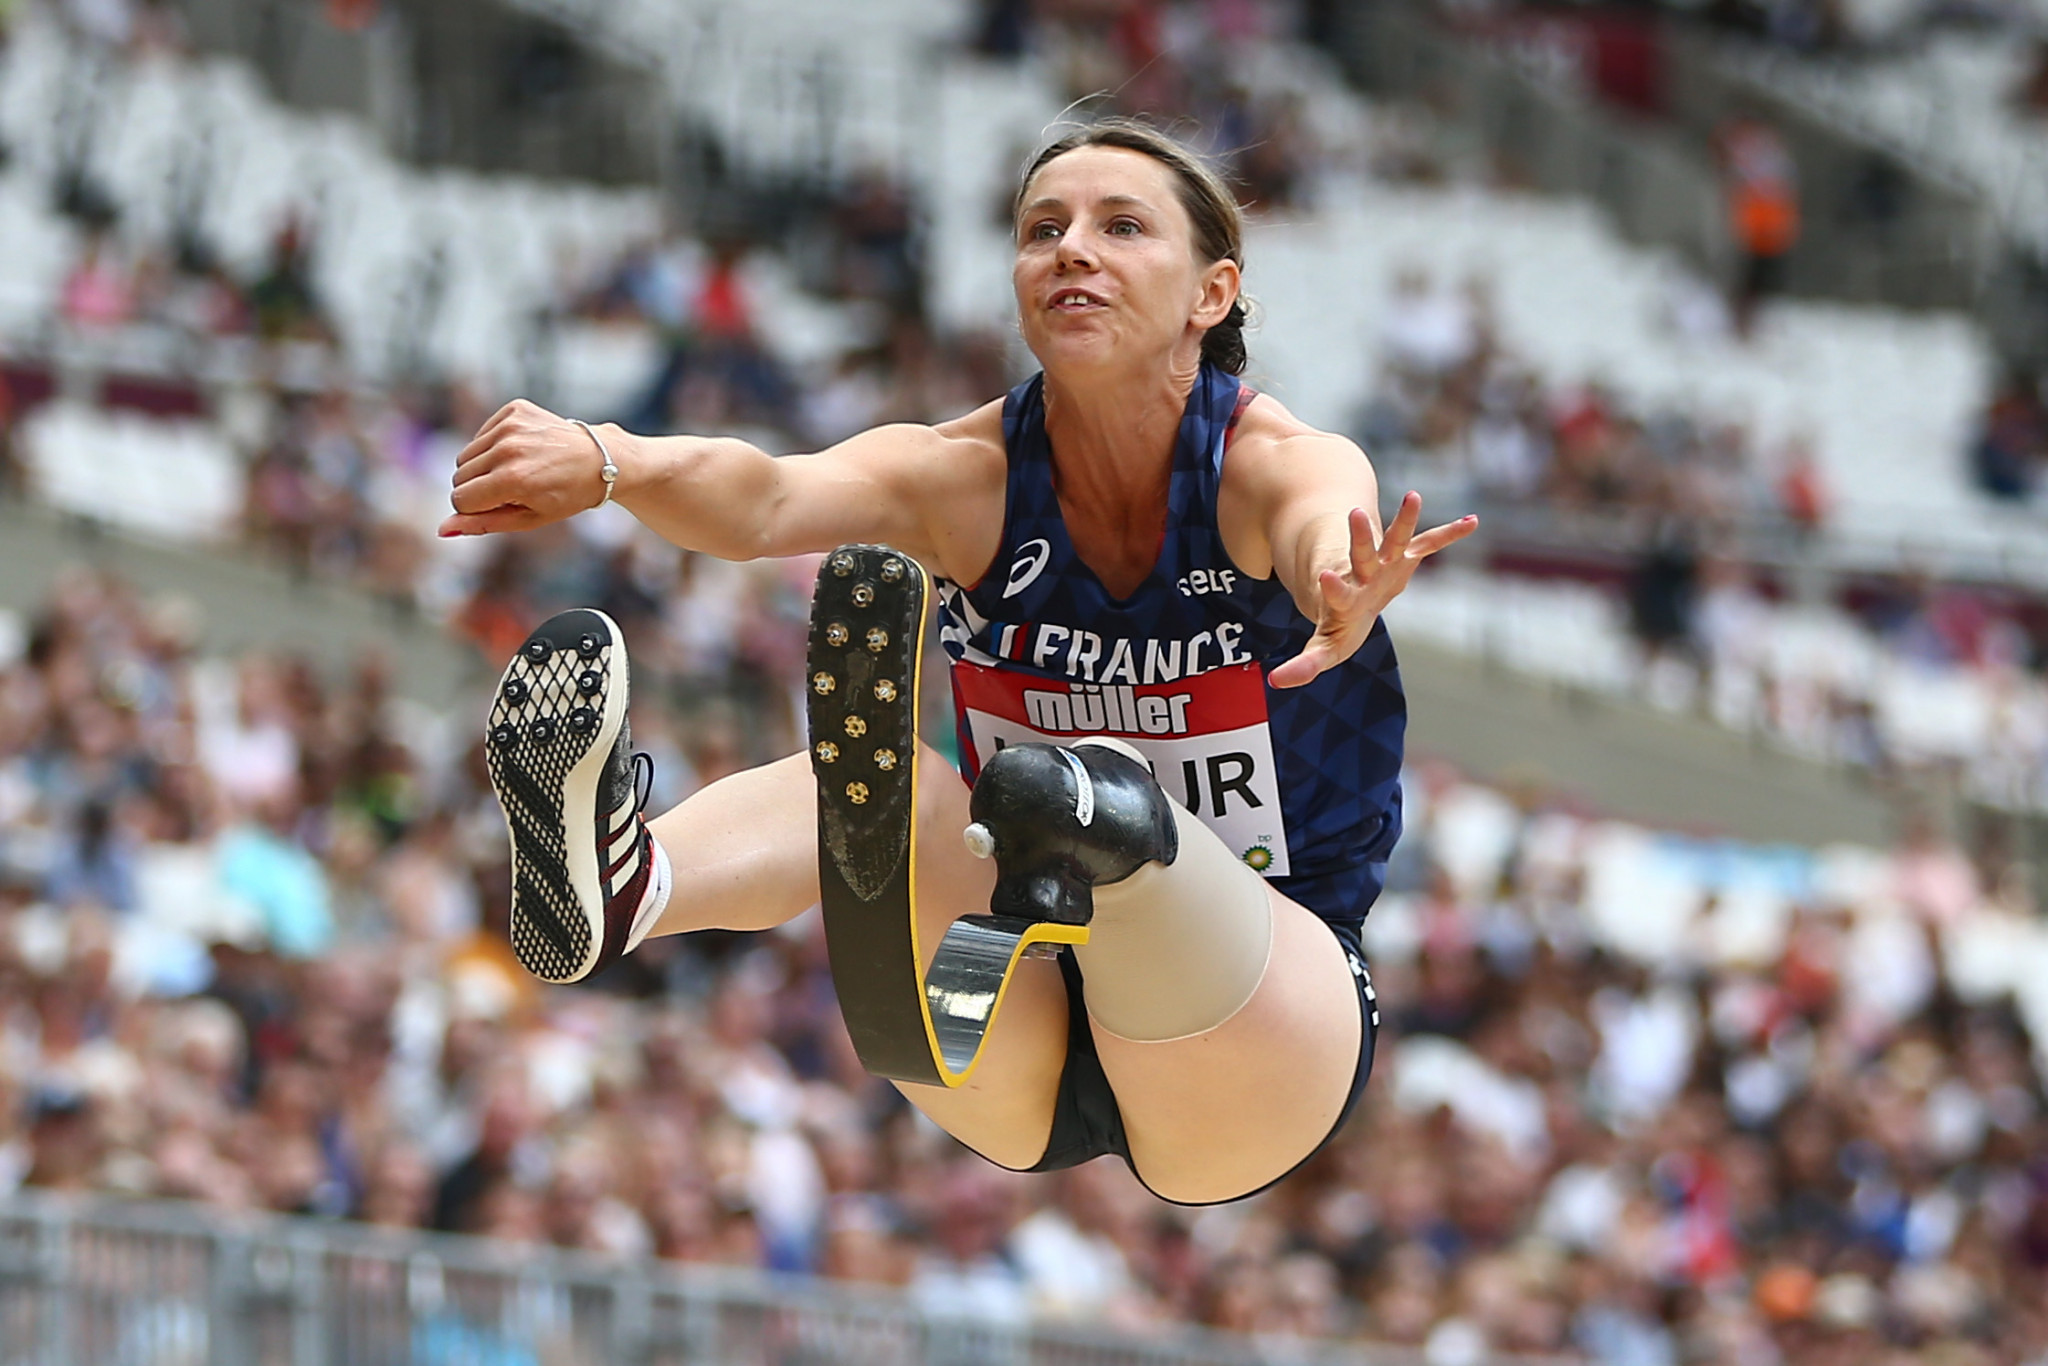 Three-time Paralympic champion Le Fur joins French Economic, Social and Environmental Council